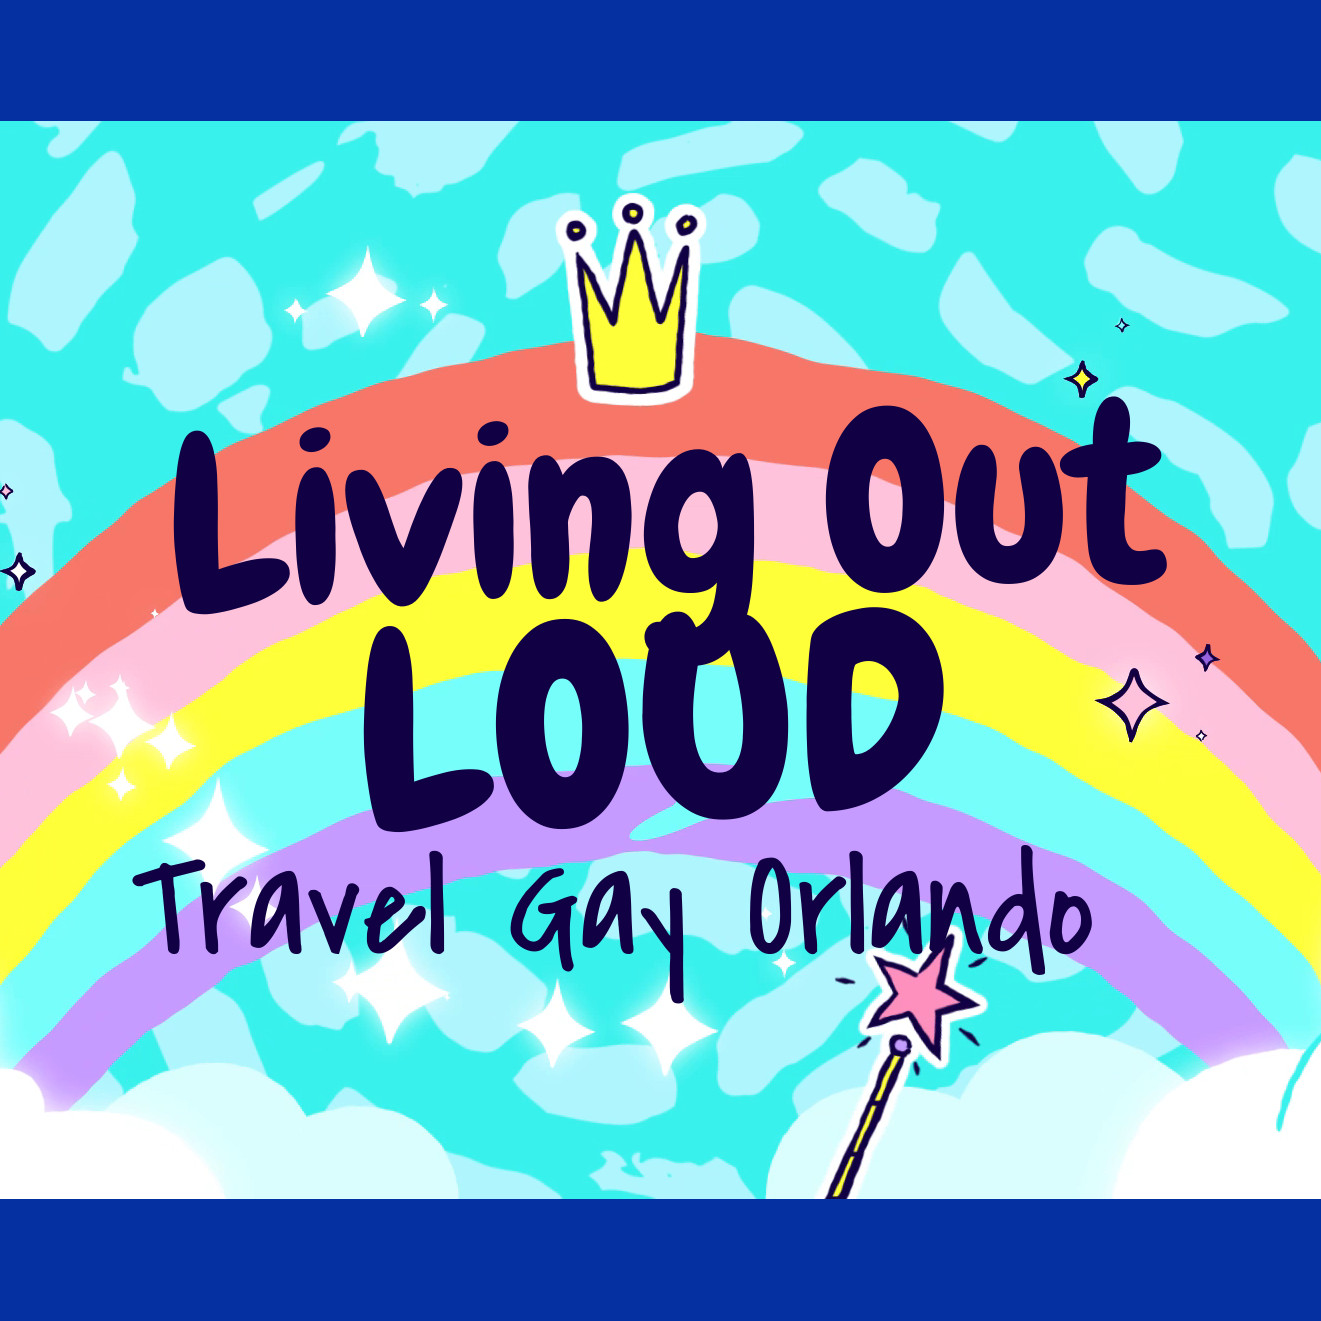 Living Outloud in Gay Orlando: Travel Orlando with Welcome to Sam Jose